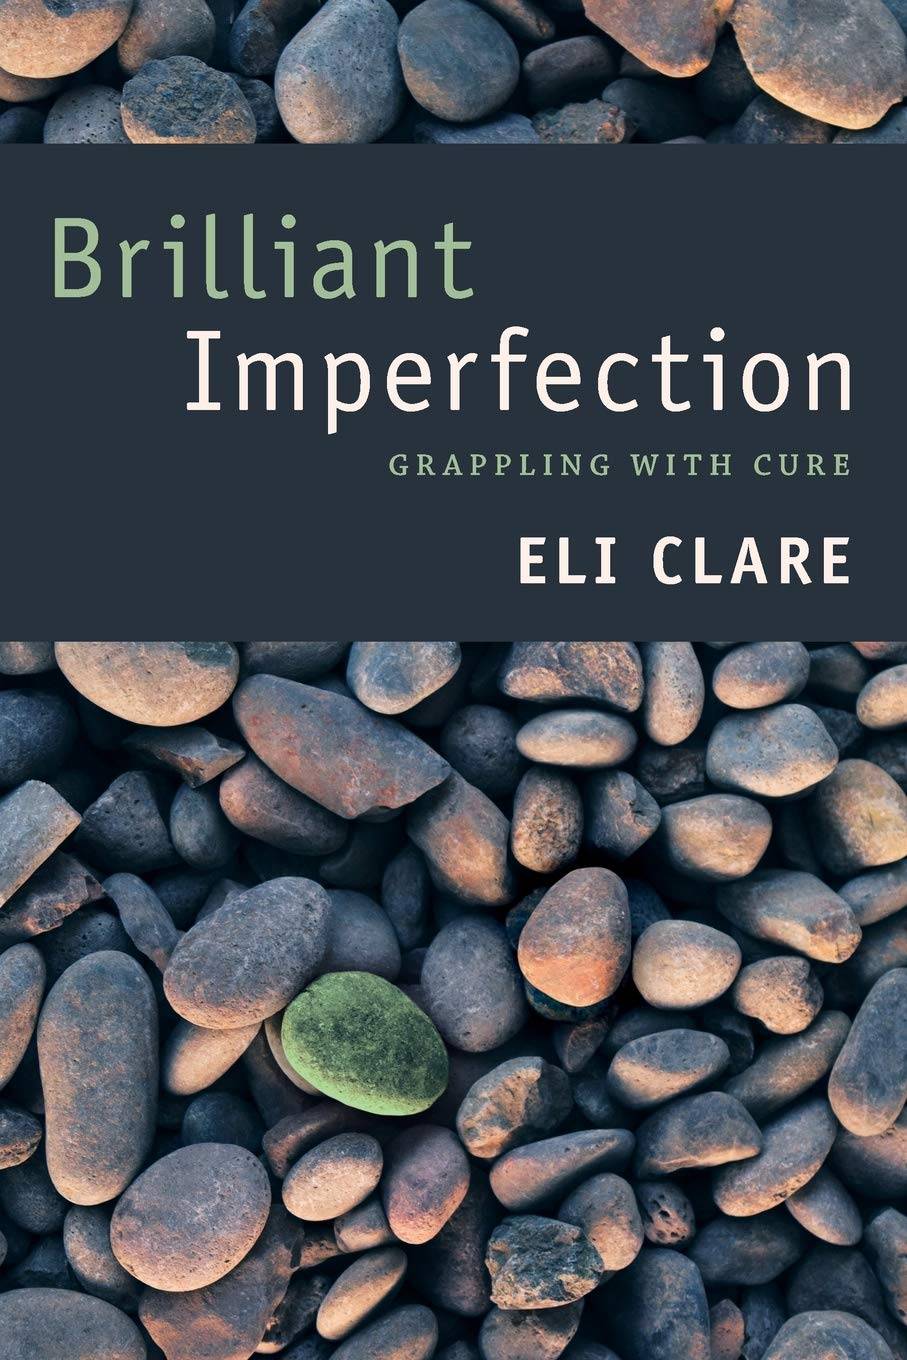 "Brilliant Imperfection" book cover featuring a photo of river rocks.